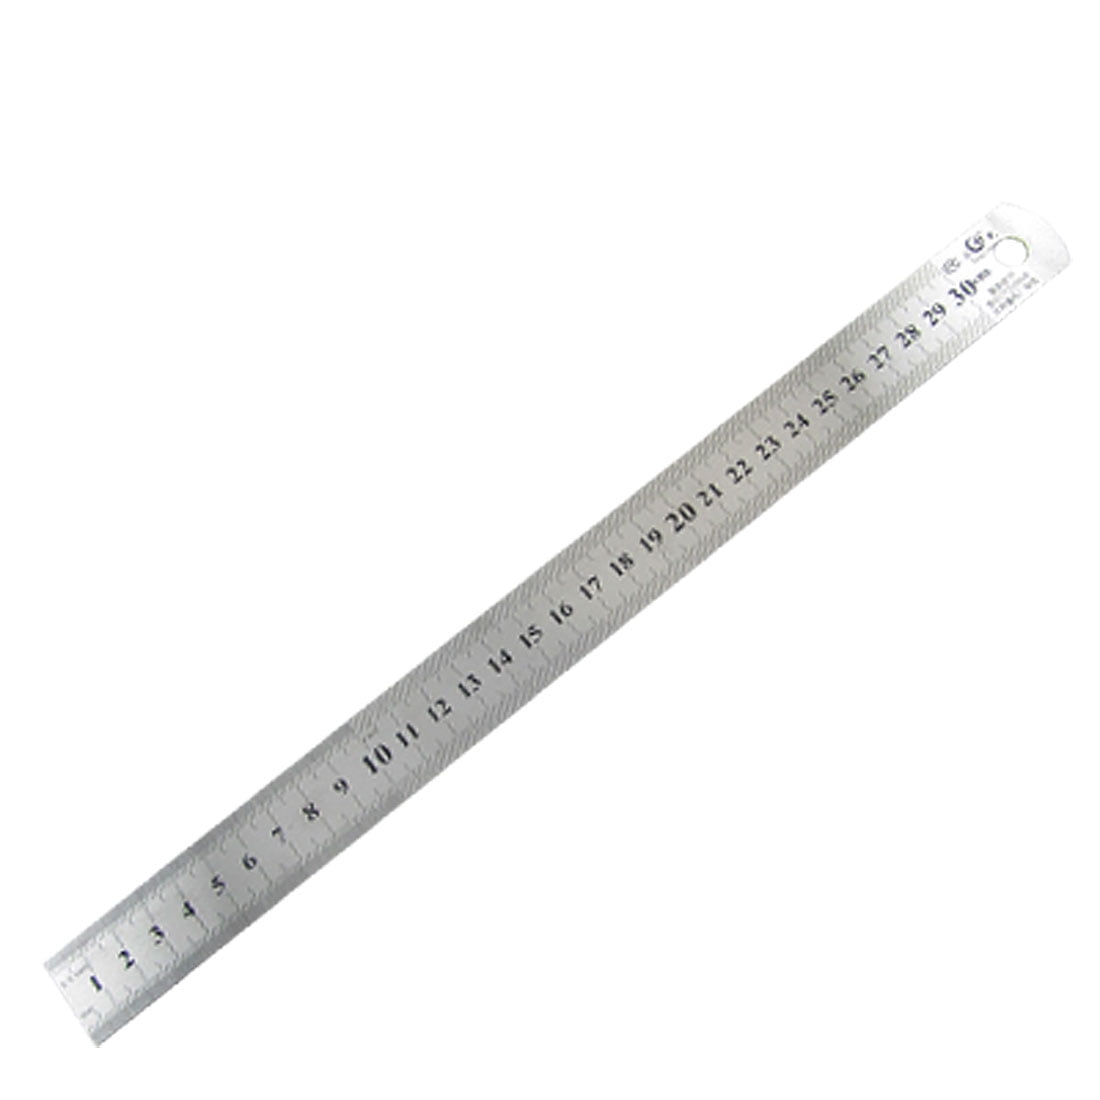 Stainless Steel Ruler 12-inch 30cm Straight Ruler Inches and Metric Scale 